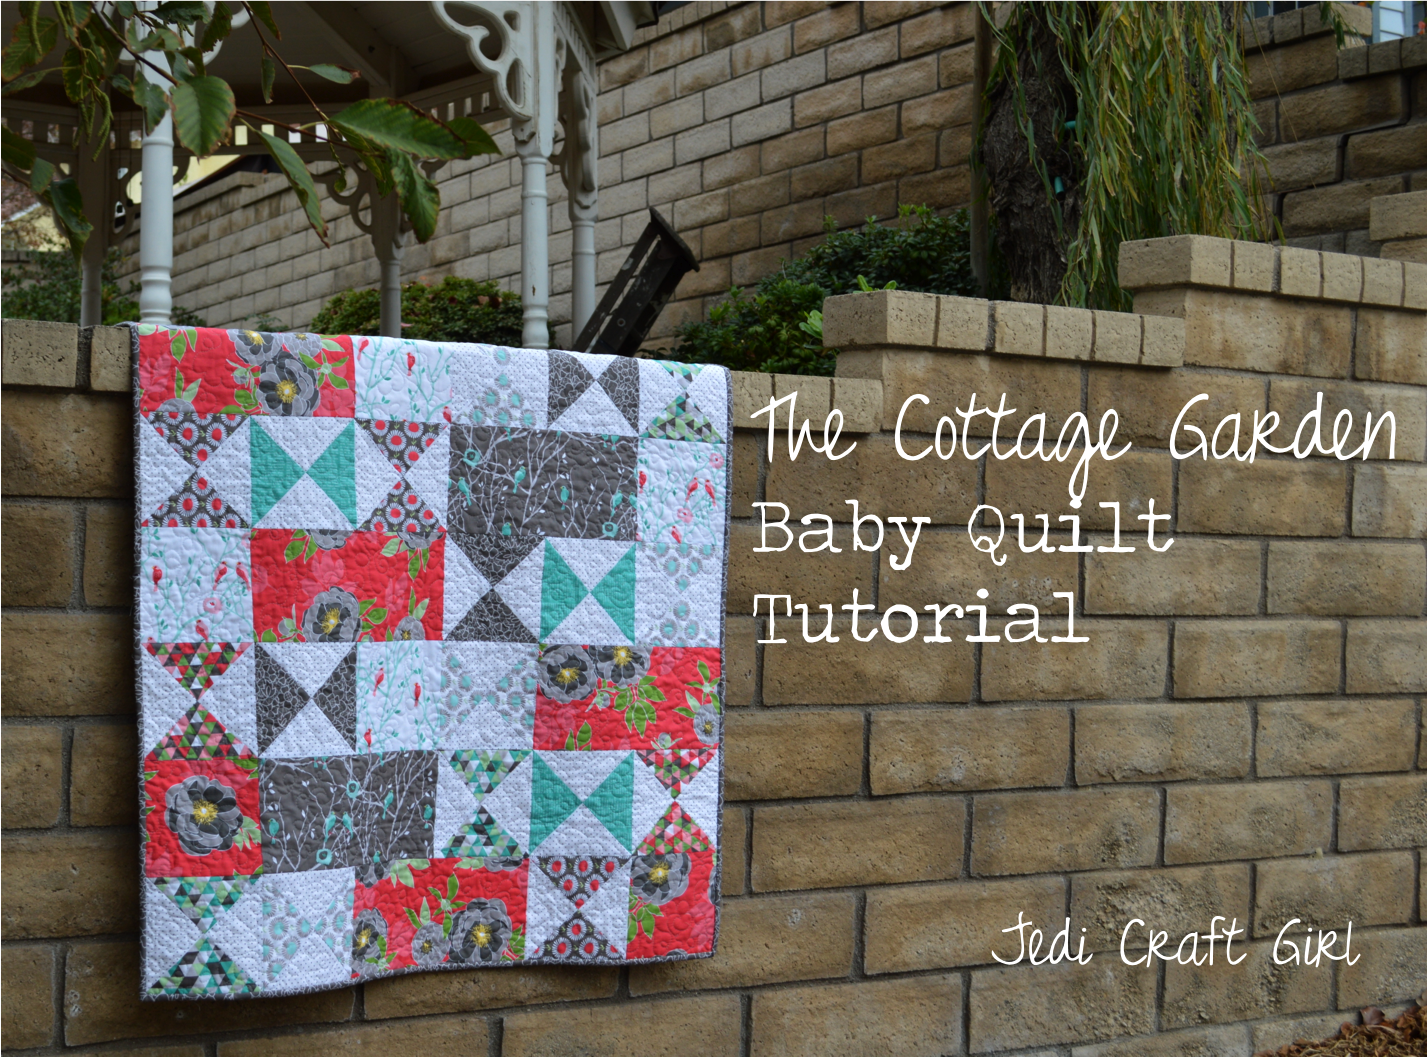 Tales Of Textiles: Quilts Throws And Fabrics In Cottage Decor